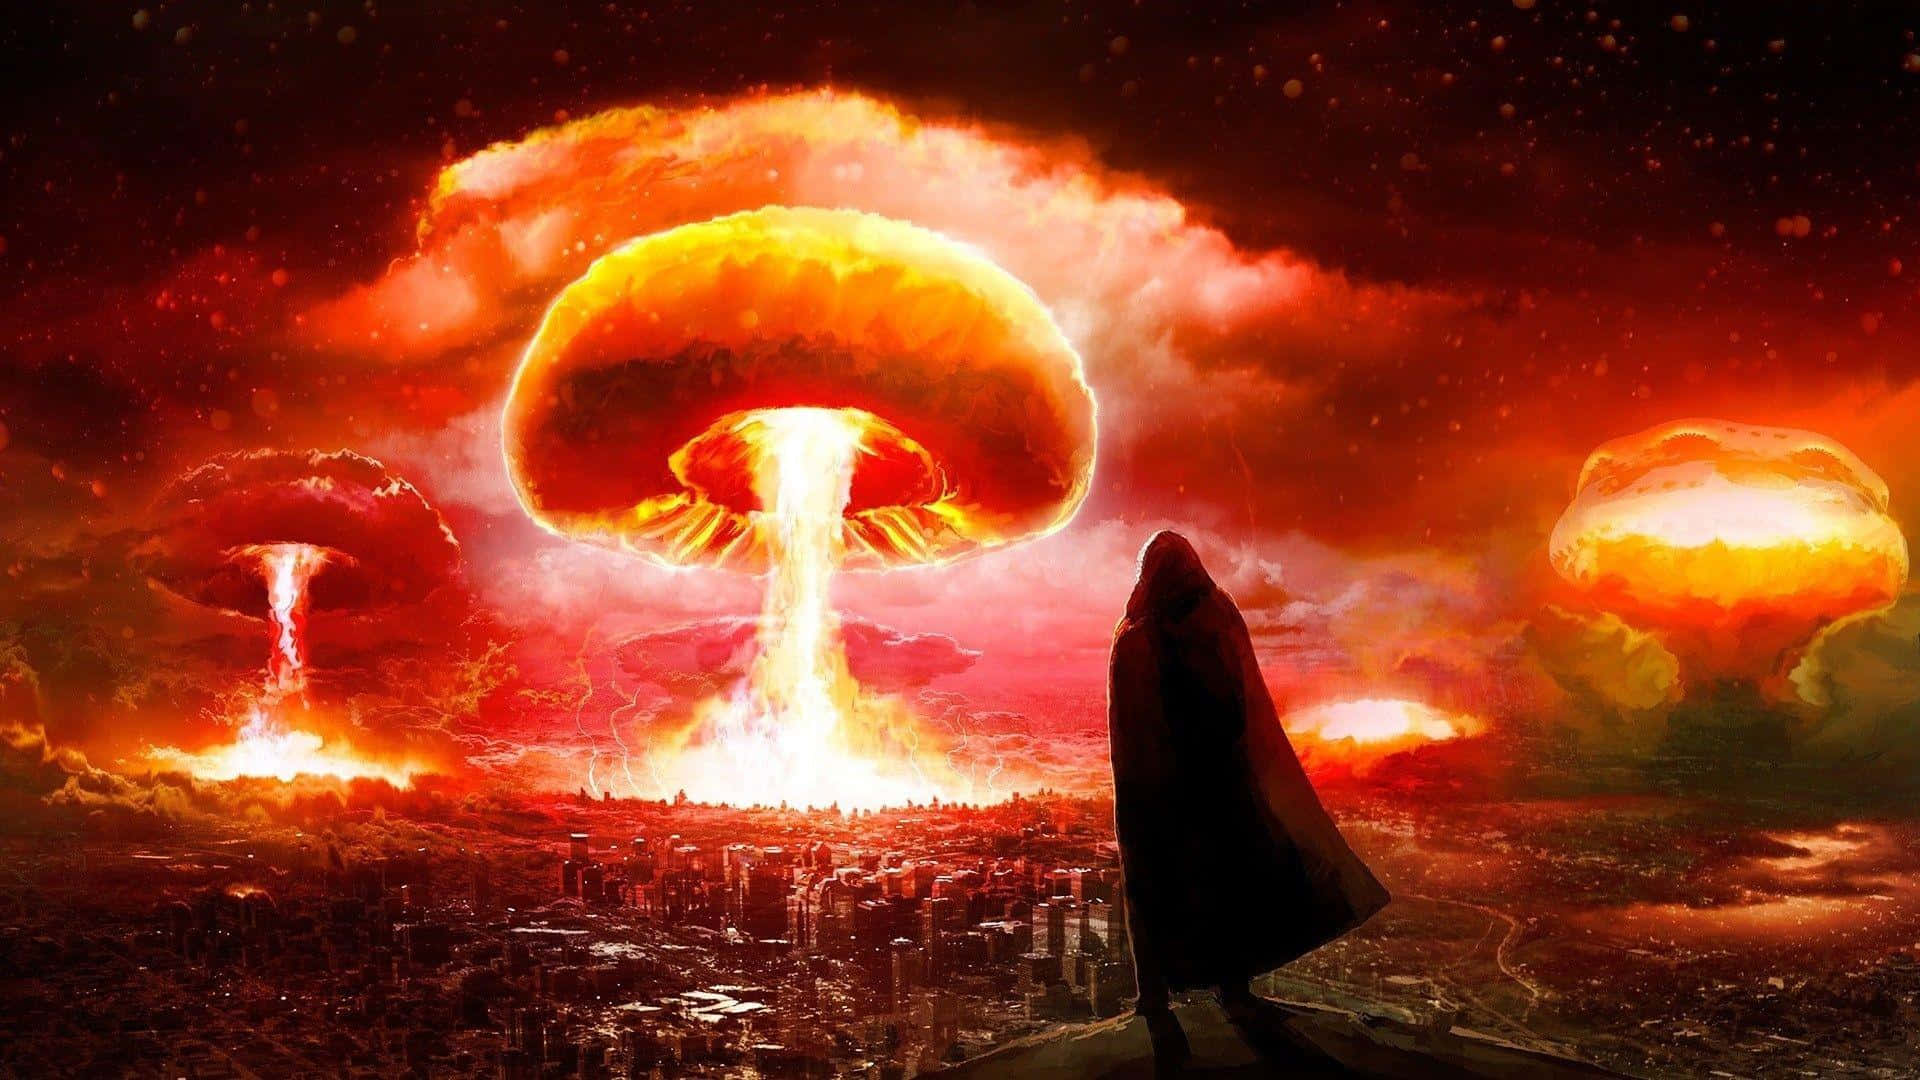 Apocalyptic_ Nuclear_ Explosions Wallpaper